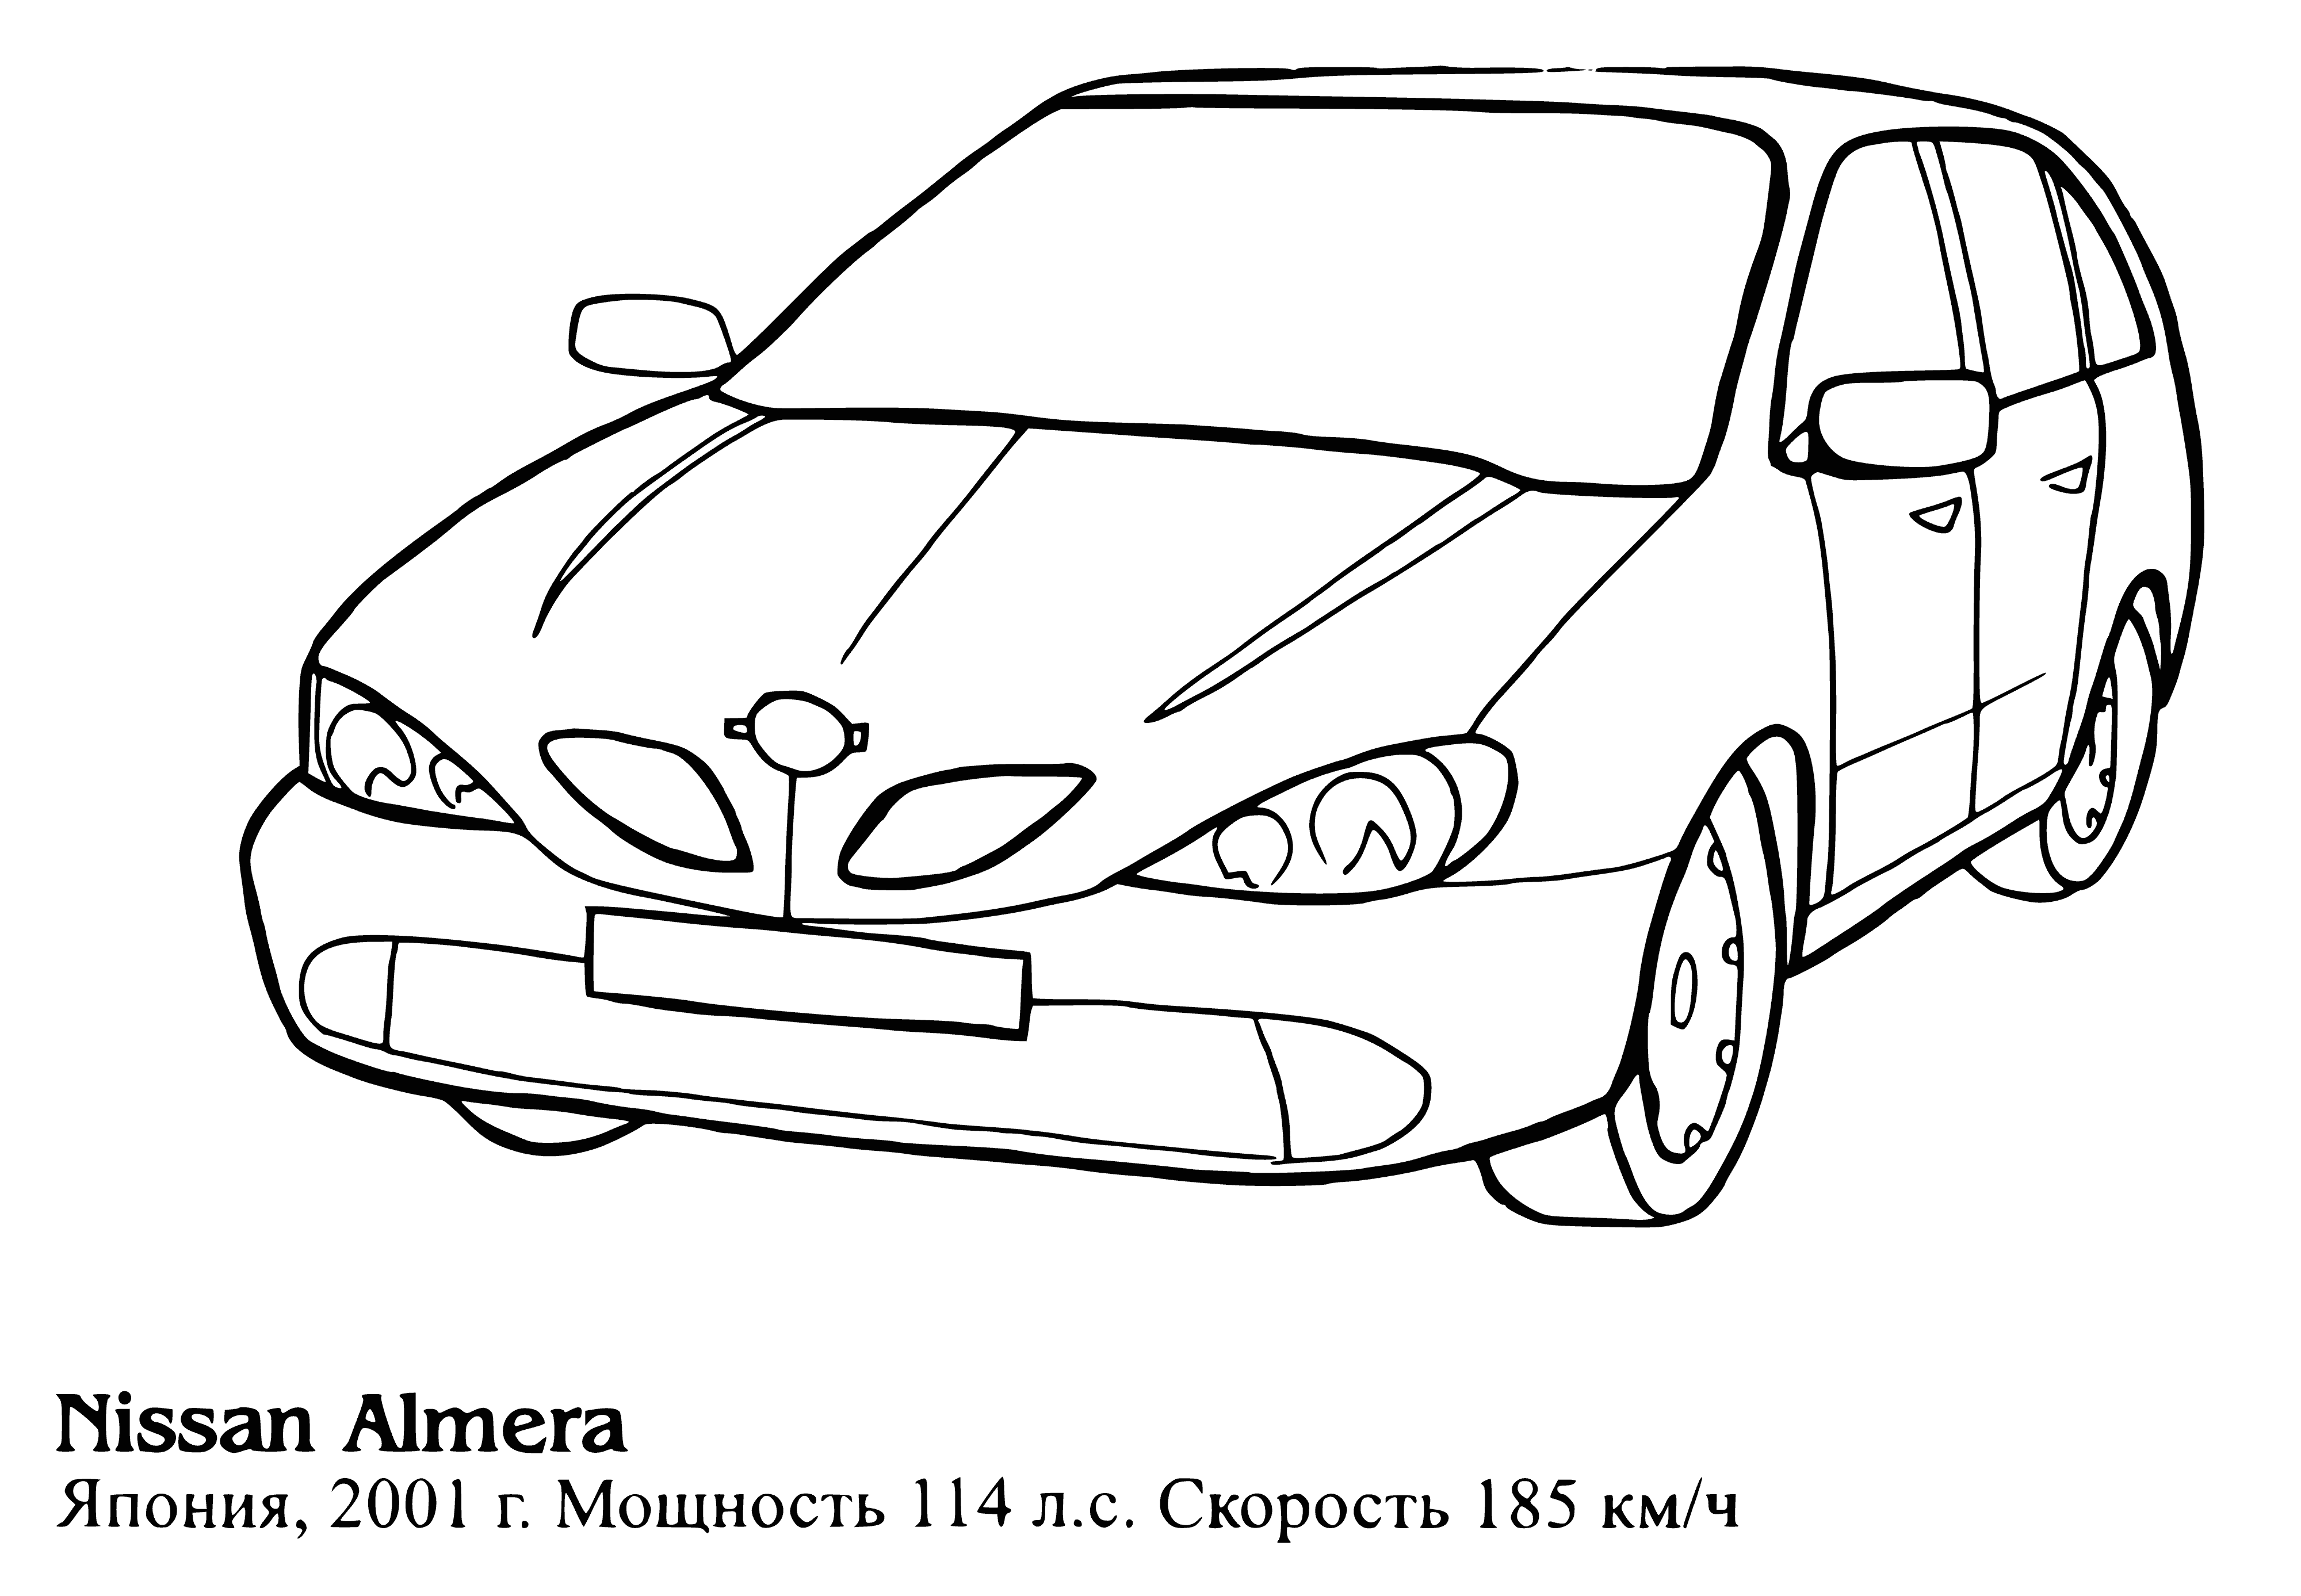 coloring page: Nissan Almera: silver car w/black details, 5 doors, 4 visible in coloring page, windows slightly tinted.